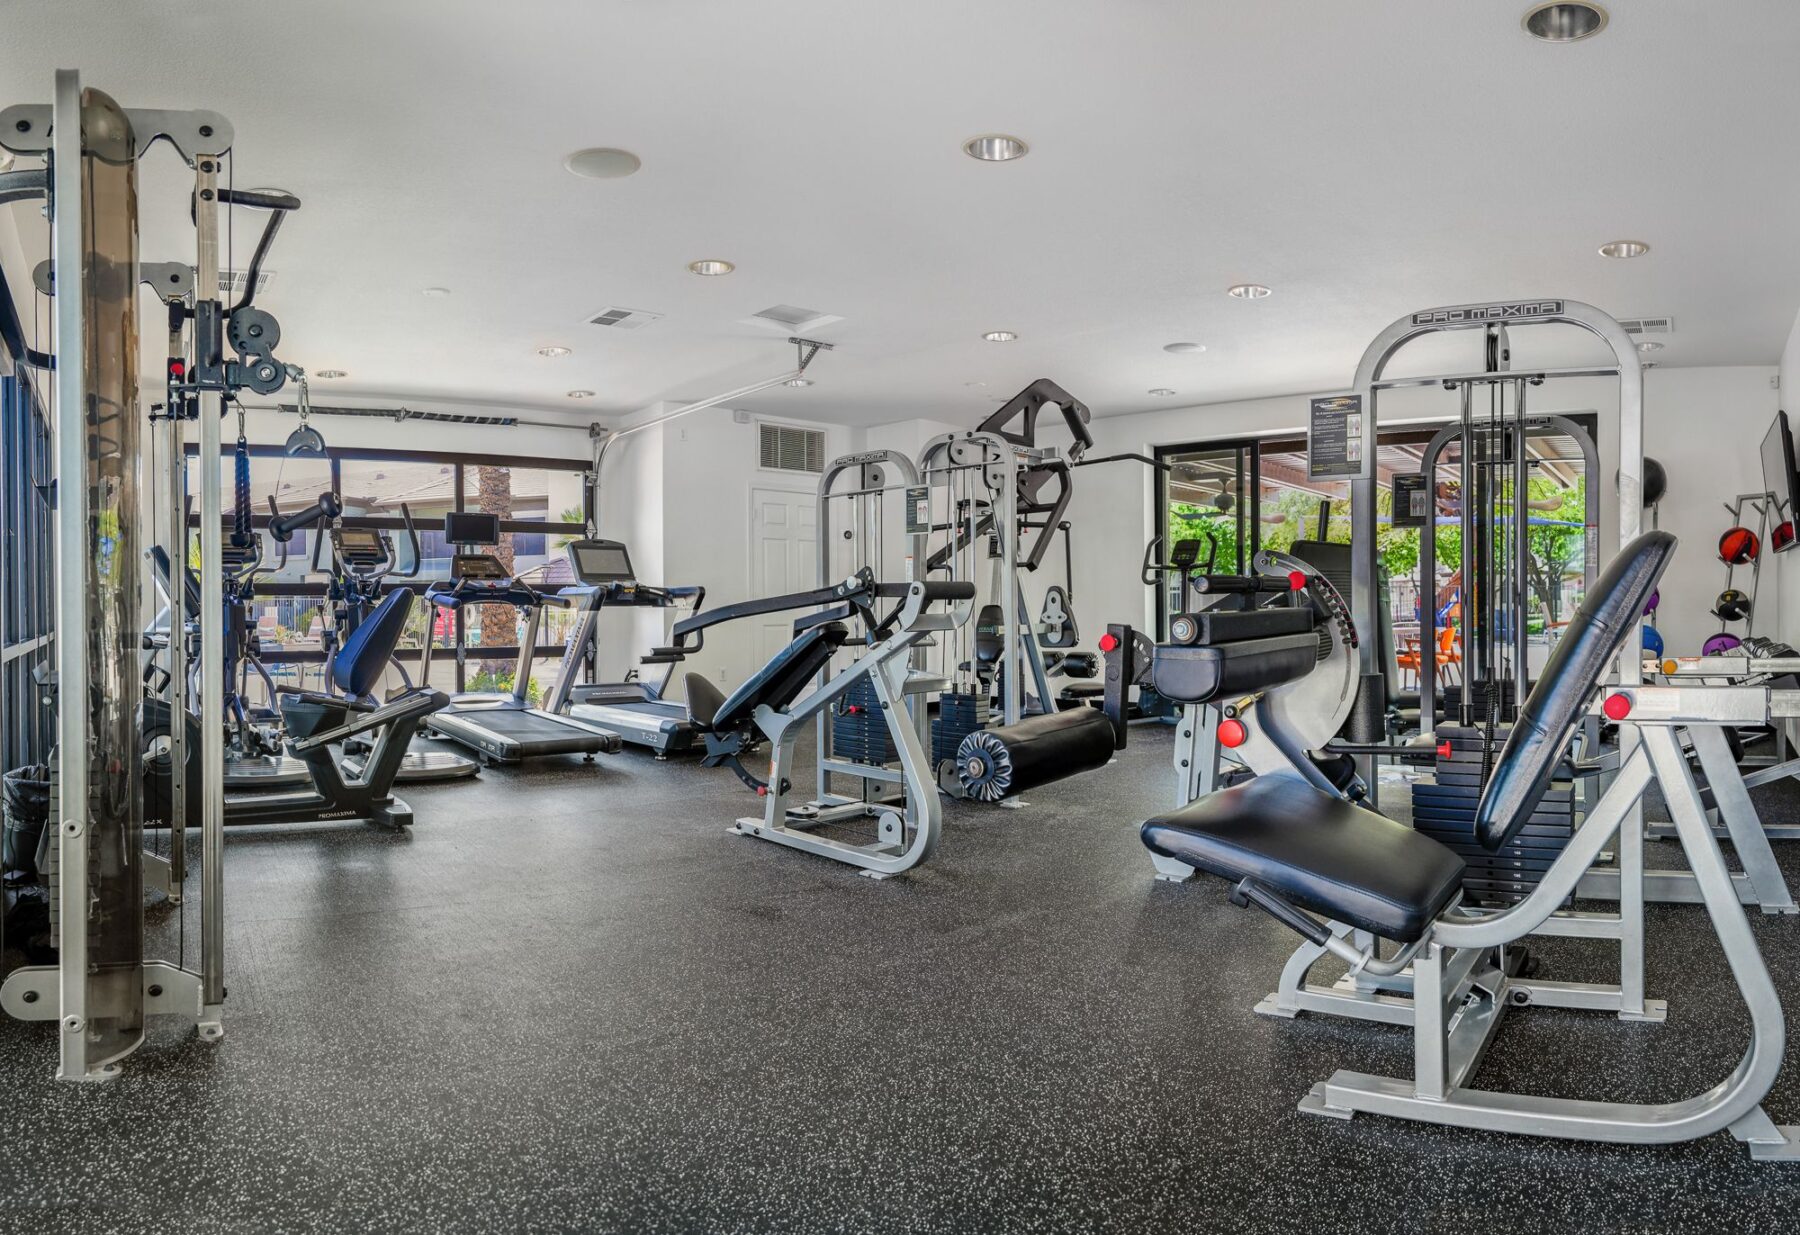 Fitness center with strength and cardio equipment